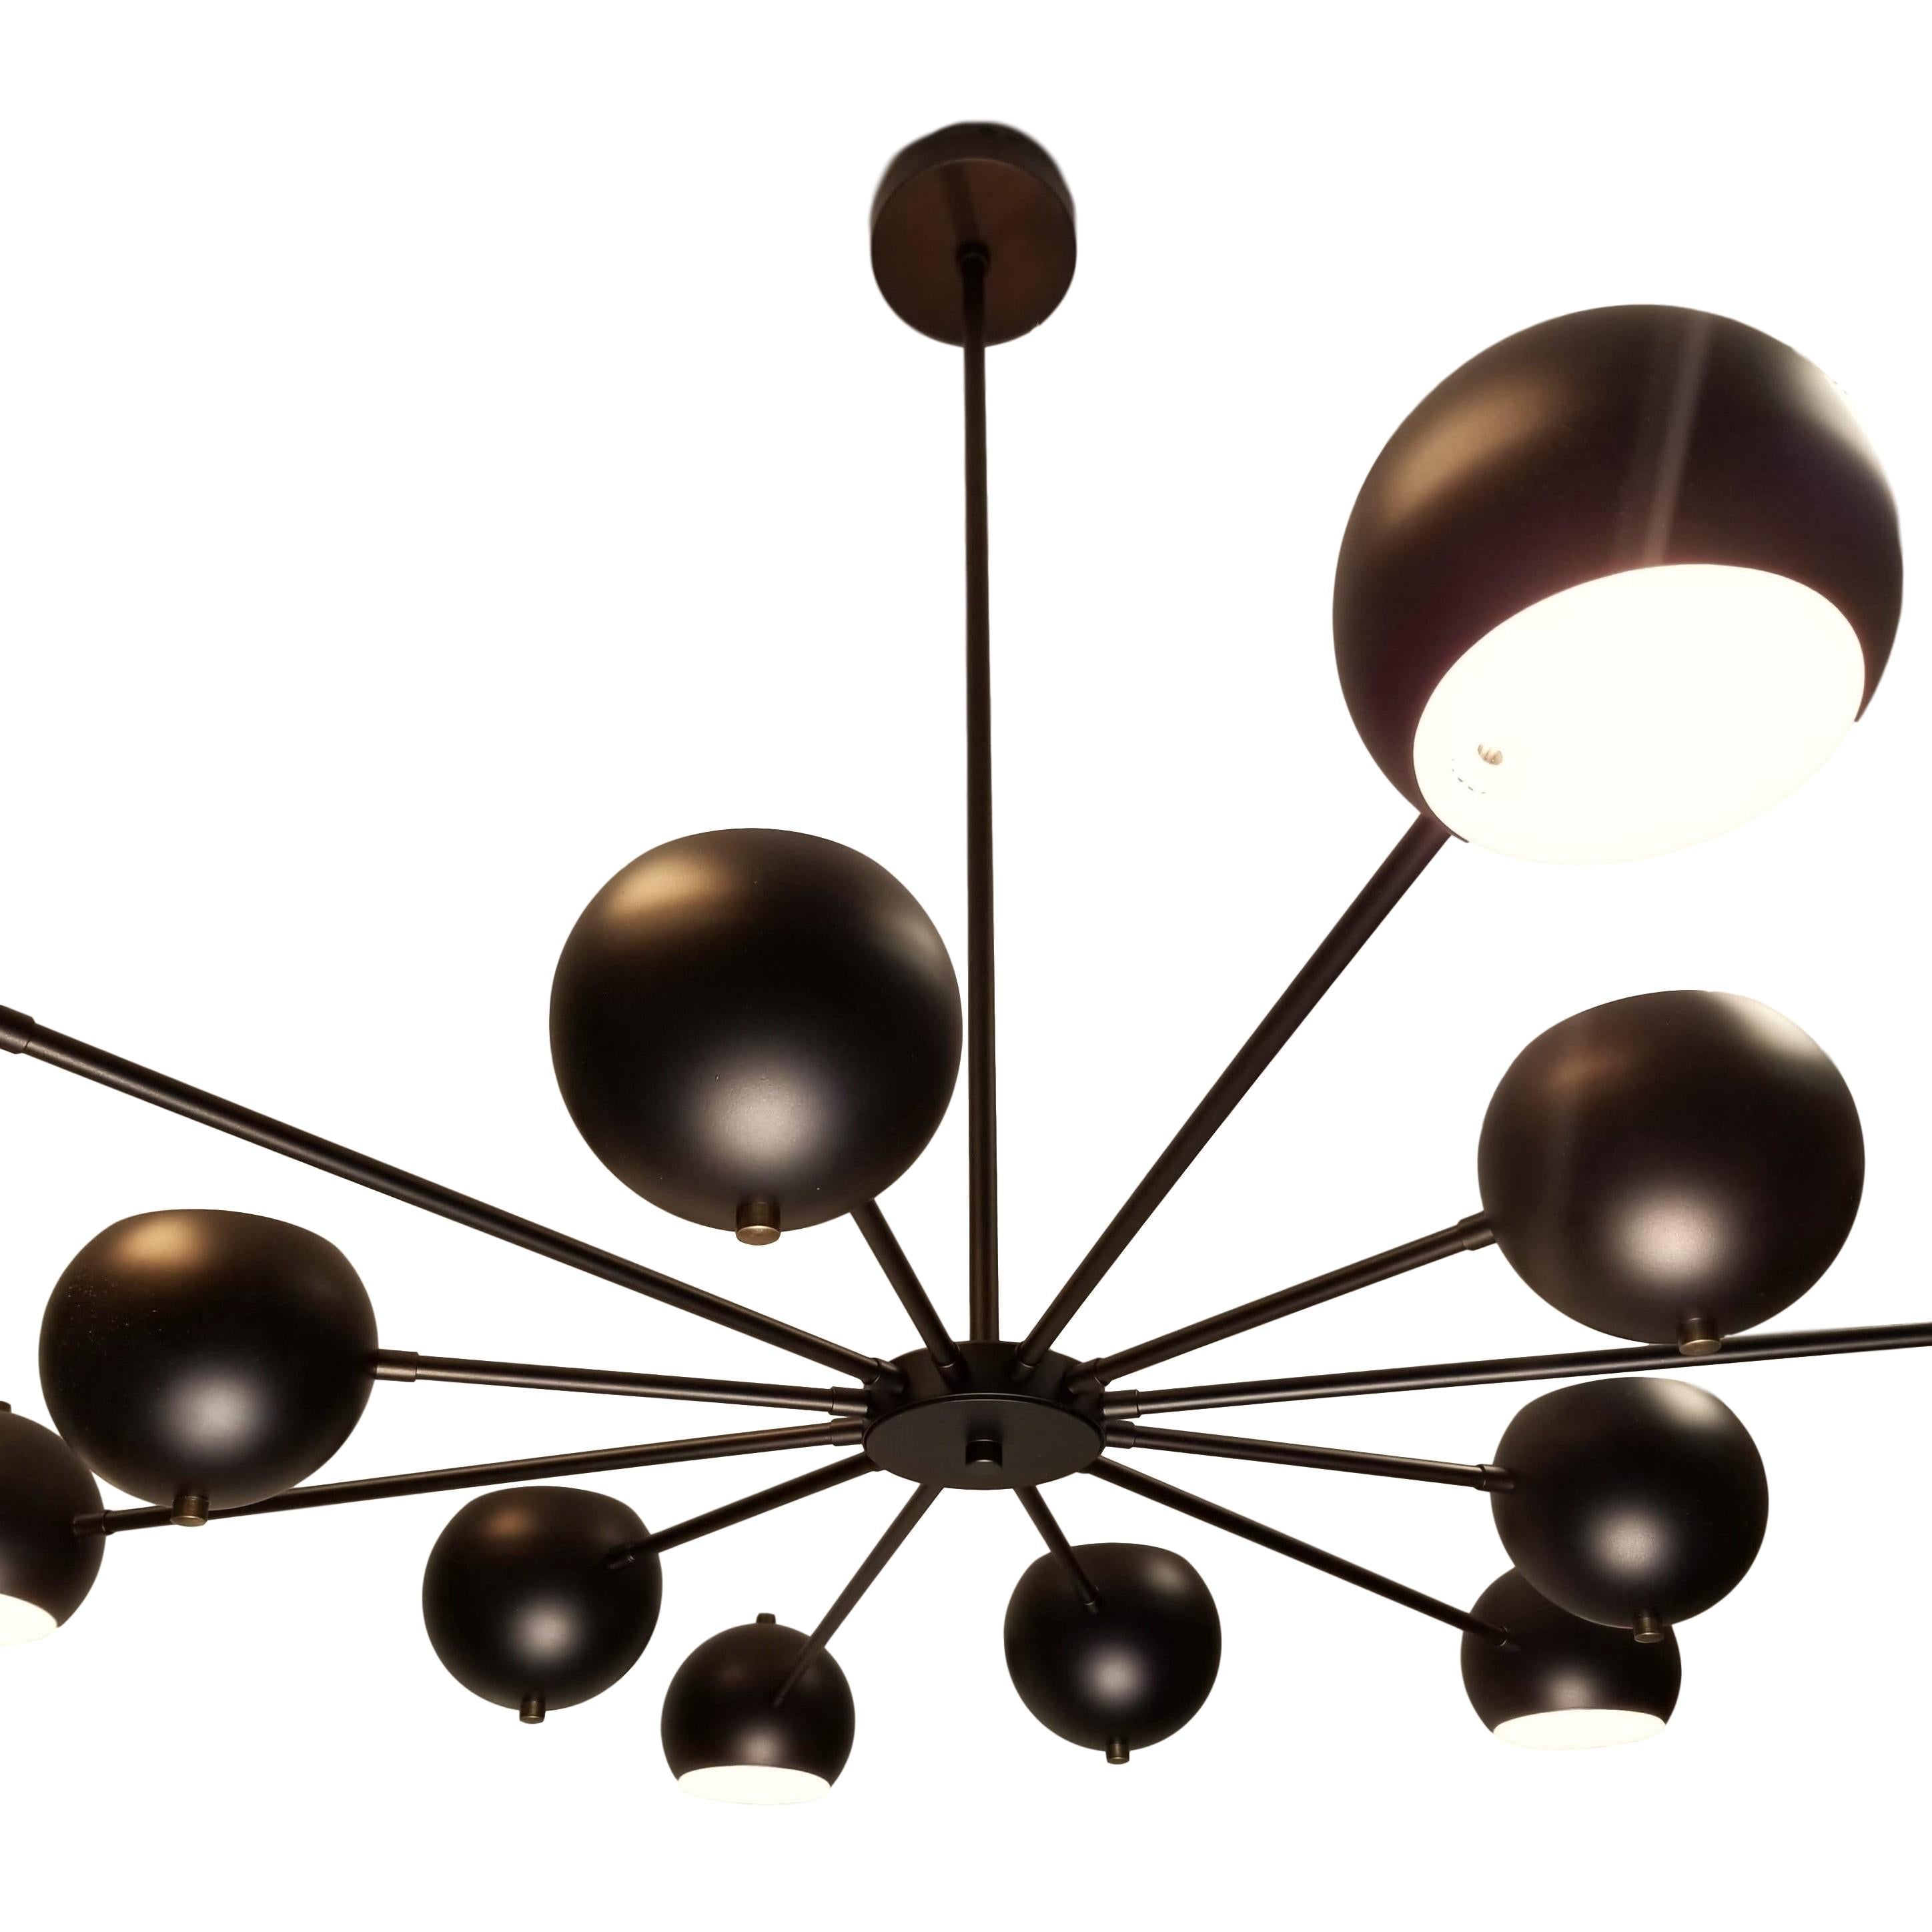 North American Modern Supernova Chandelier in Oil-Rubbed Bronze by Blueprint Lighting